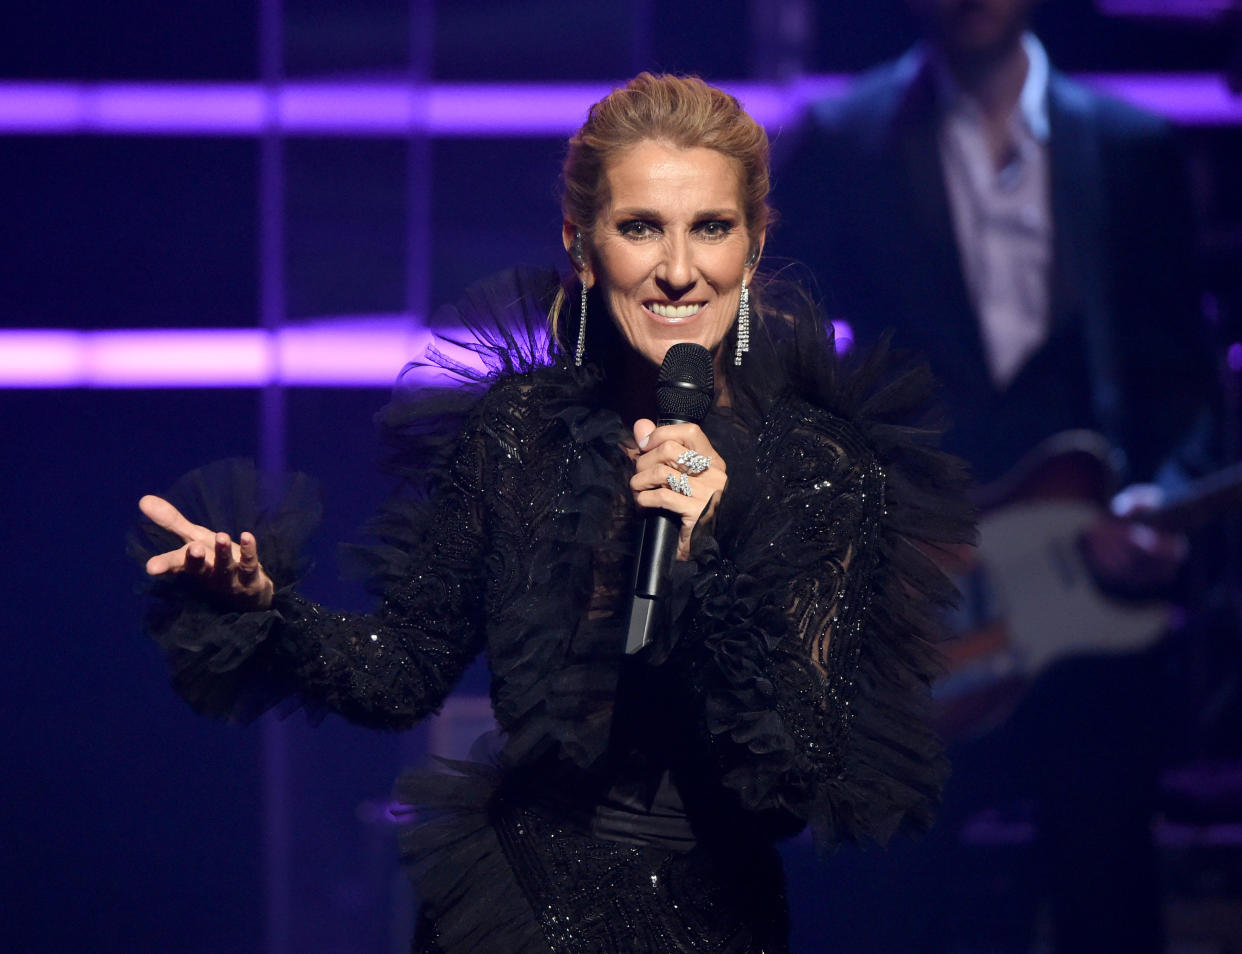 LOS ANGELES, CALIFORNIA - APRIL 03:  Celine Dion announces COURAGE WORLD TOUR, set to kick-off on September 18, 2019, during a special live event at The Theatre at Ace Hotel on April 03, 2019 in Los Angeles, California. (Photo by Kevin Mazur/Getty Images for CDA Productions, Inc.)